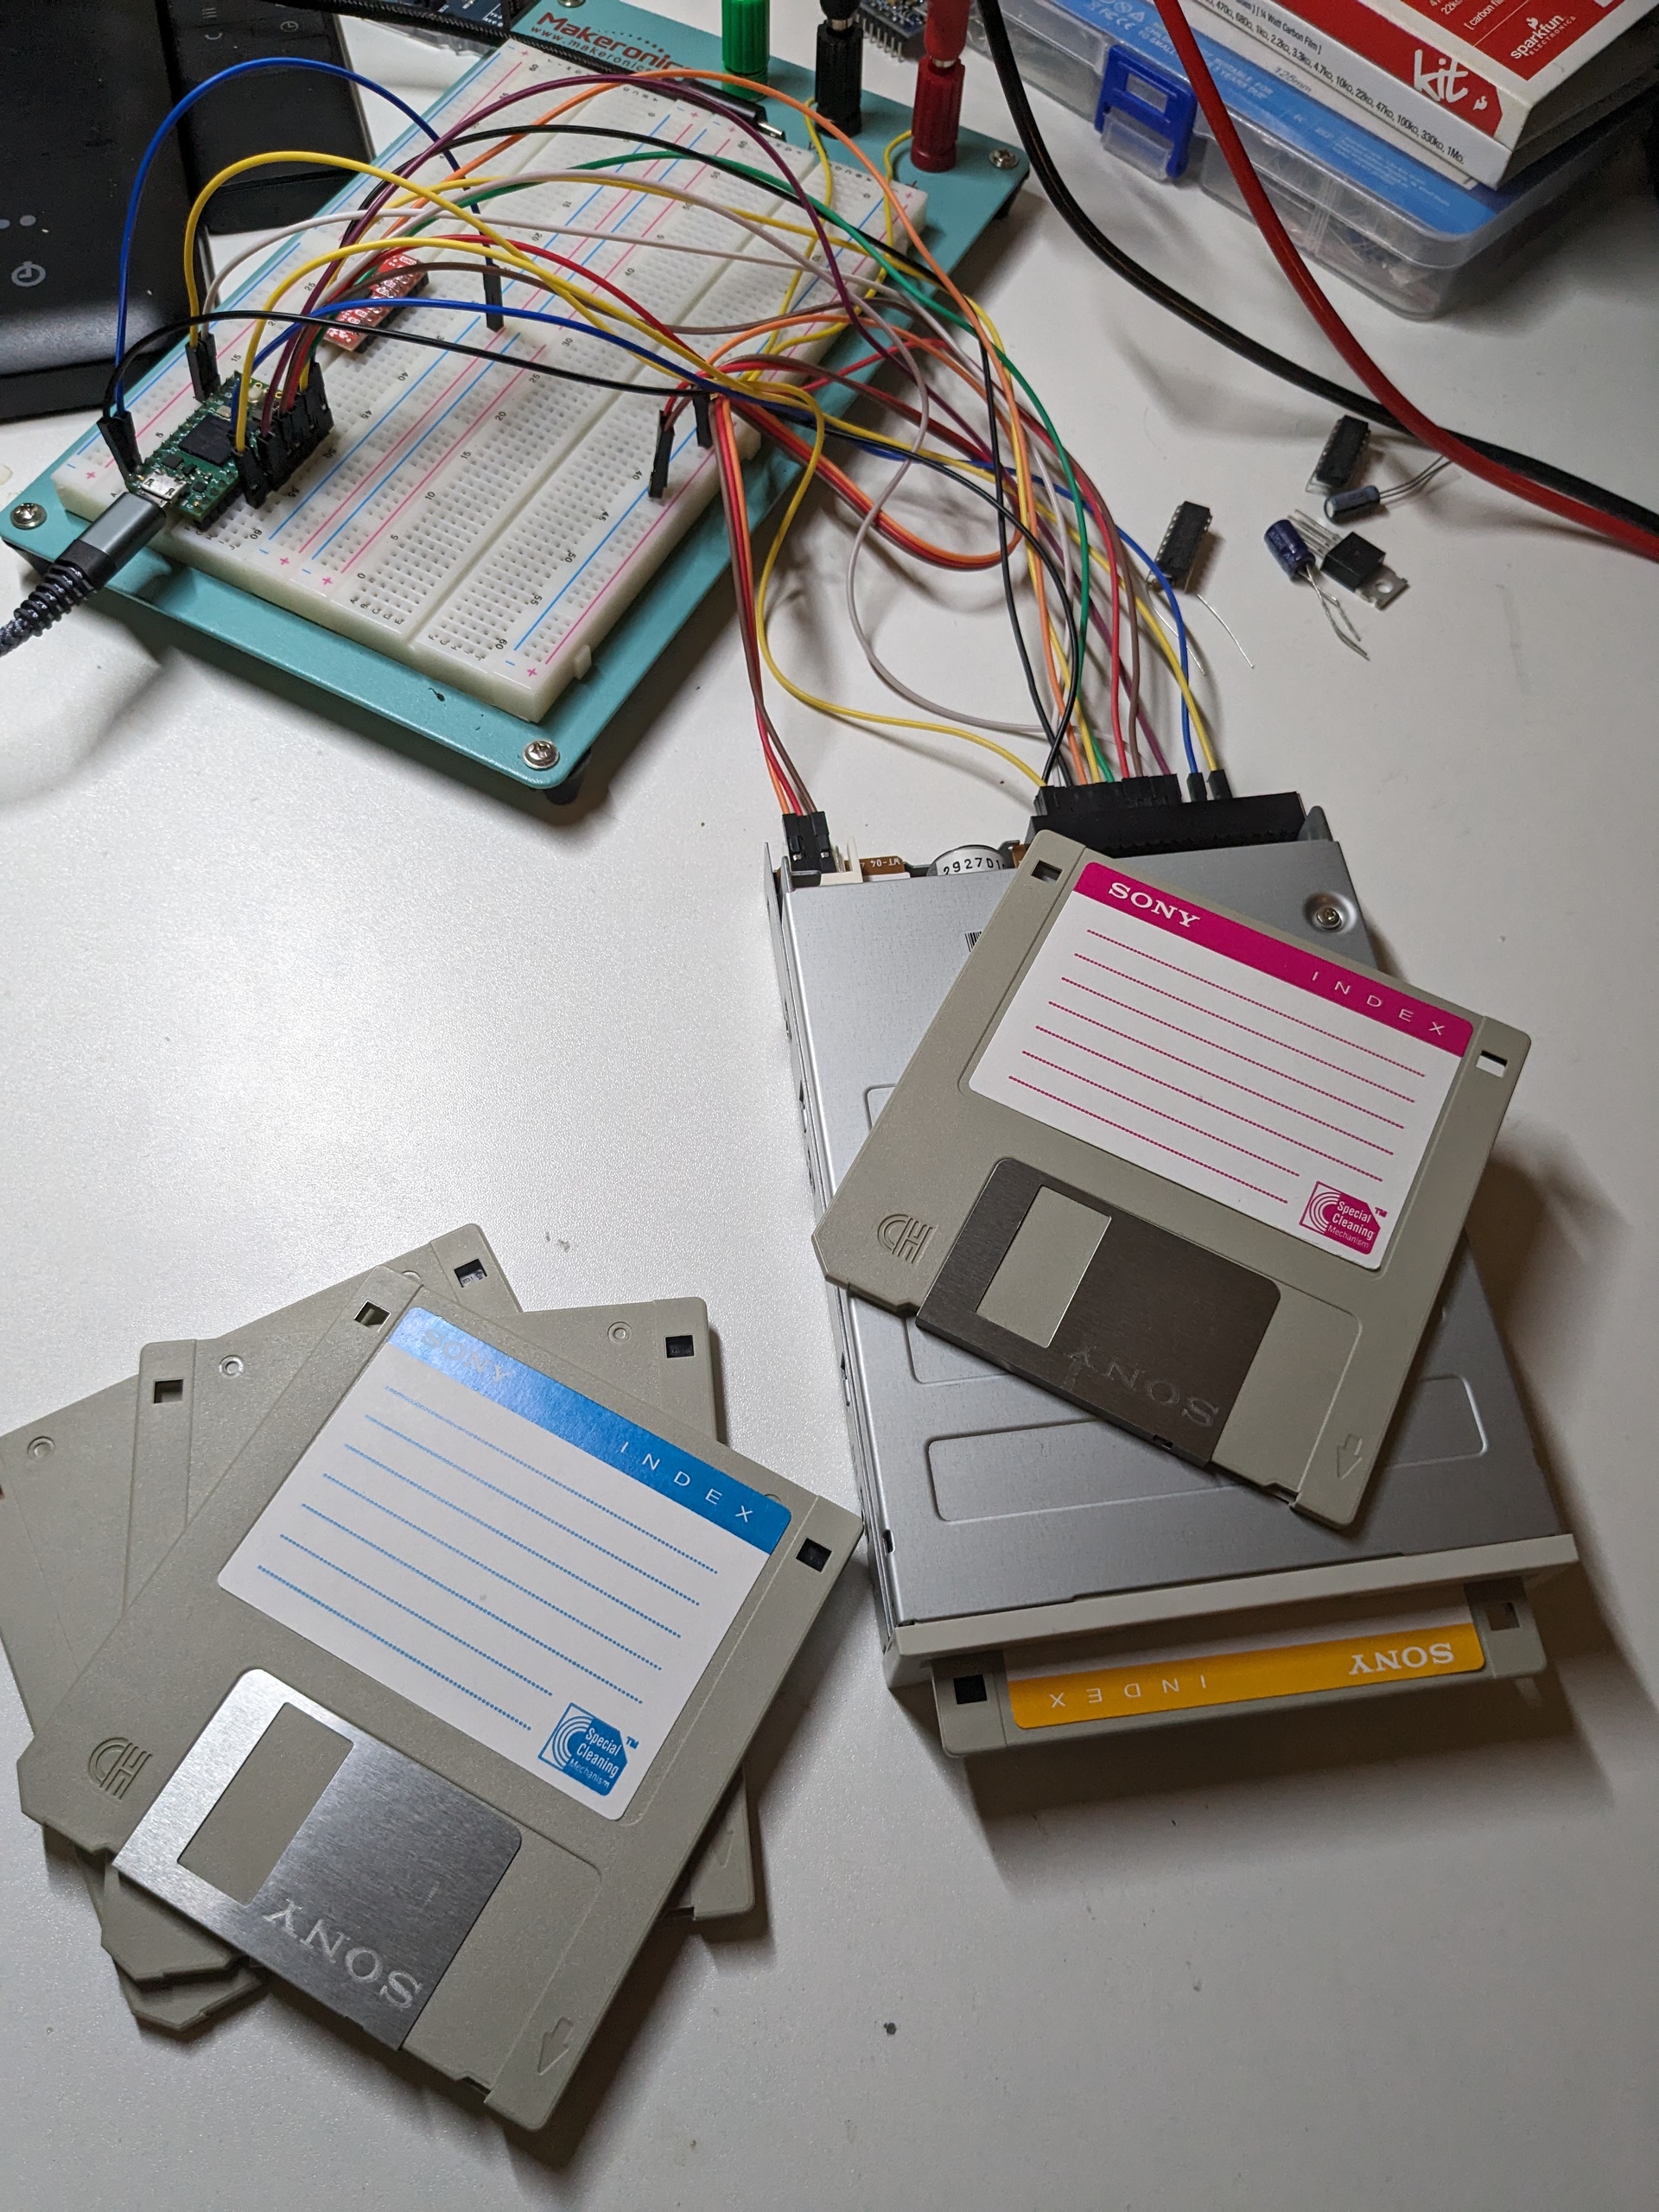 A blue floppy disk and a pink floppy disk laying around an ancient floppy drive that has yet a third floppy disk insertted into it. Behind them are various wires and circuitry which appears to be connected to the drive.